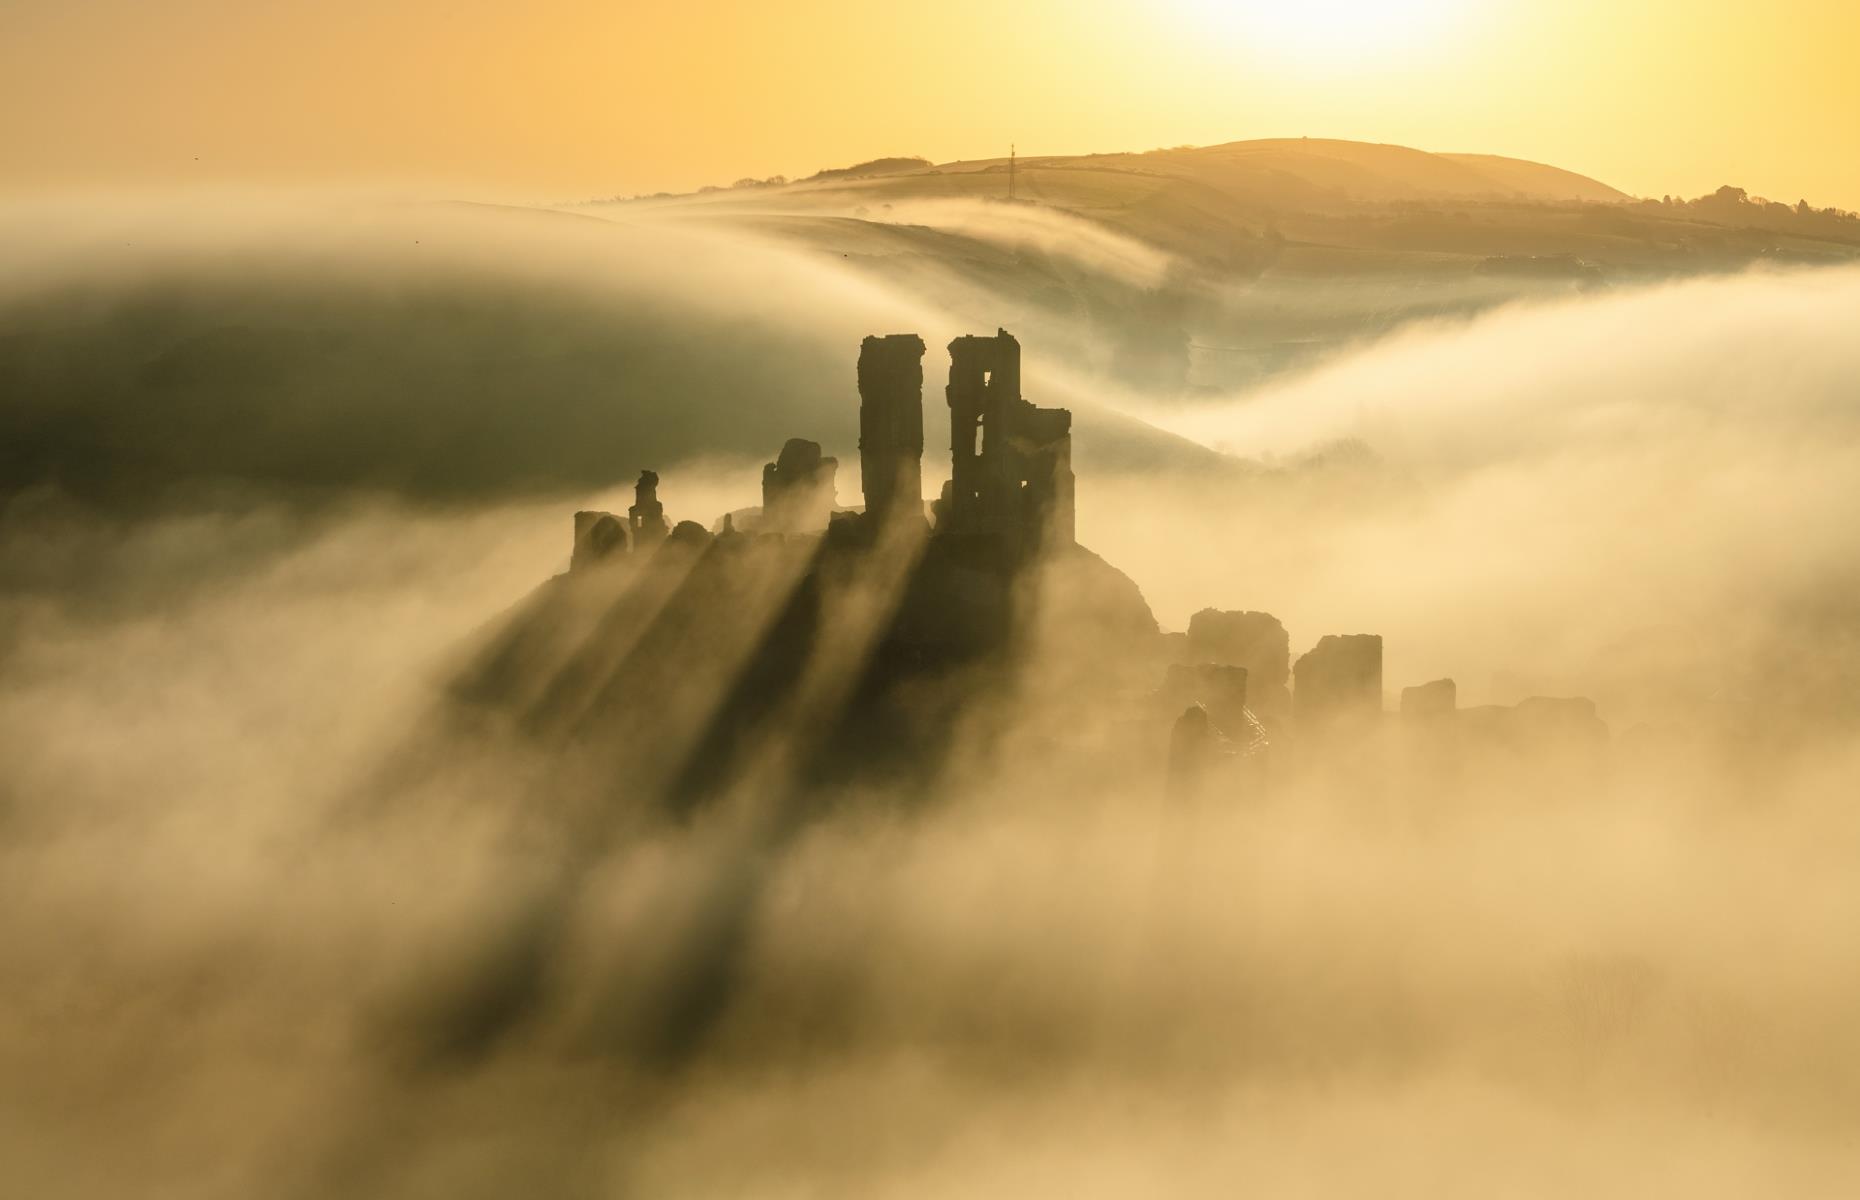 <p>Photographer Edyta Rice said it took "many attempts" to get the perfect image of Corfe Castle in misty conditions, adding that "rising sun, a golden glow and shadows falling behind the towers" eventually combined to give her the dream shot. The royal castle, which was established by William the Conqueror in the 11th century and was partially destroyed during the English Civil War (1642–1651), is one of <a href="https://www.loveexploring.com/news/114240/best-places-to-visit-in-dorset-lyme-regis-swanage-sherborne-2021">Dorset</a>'s most famous historic landmarks. </p>